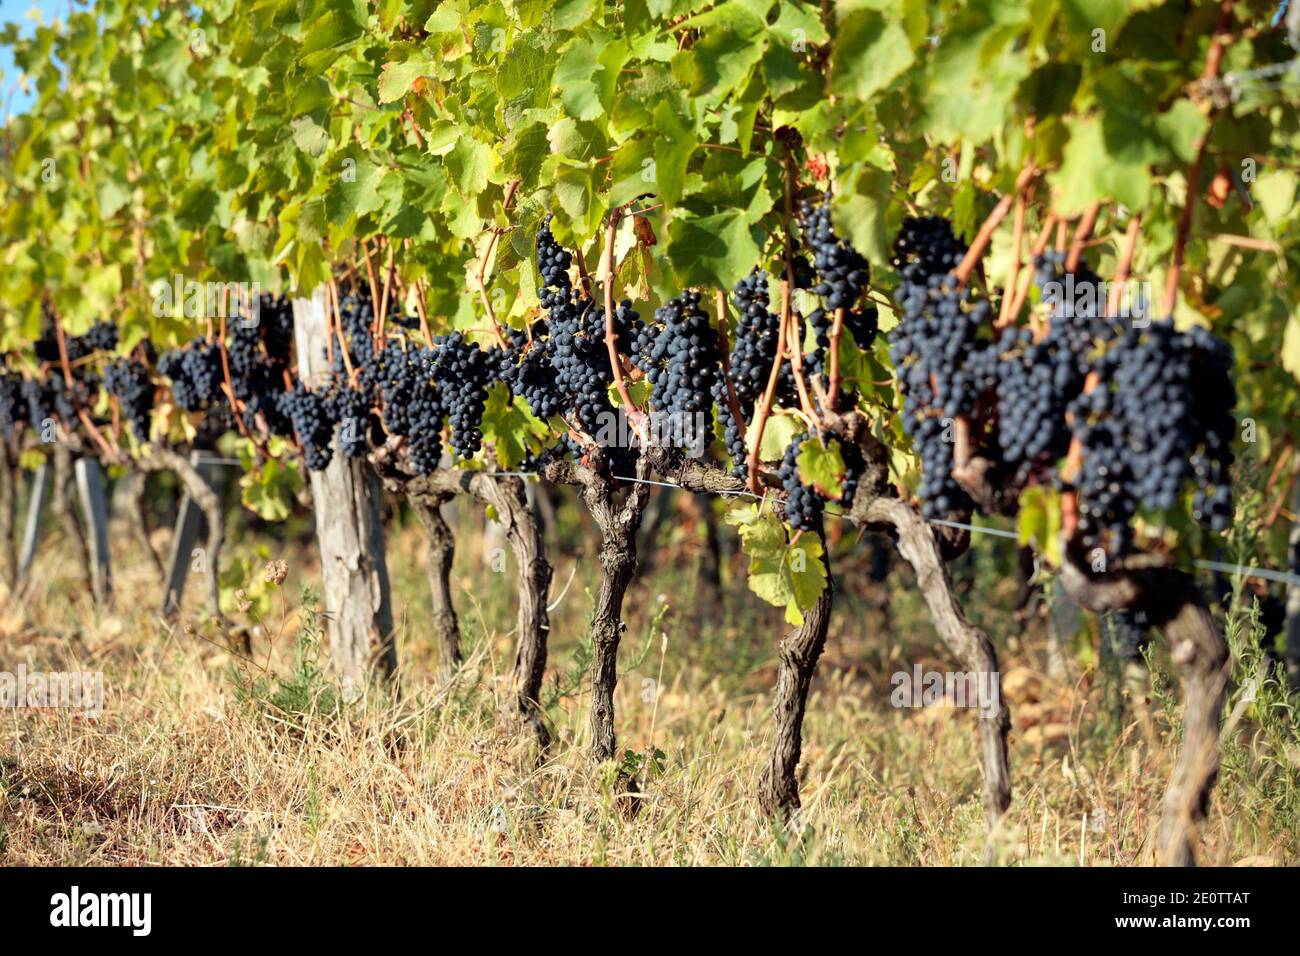 Black grapes pictured during harvest in vineyards of Eric and Joel Durand wine called Cornas and Saint Joseph in Cornas, France on September 23, 2010. Photo by Pascal Parrot/ABACAPRESS.COM Stock Photo